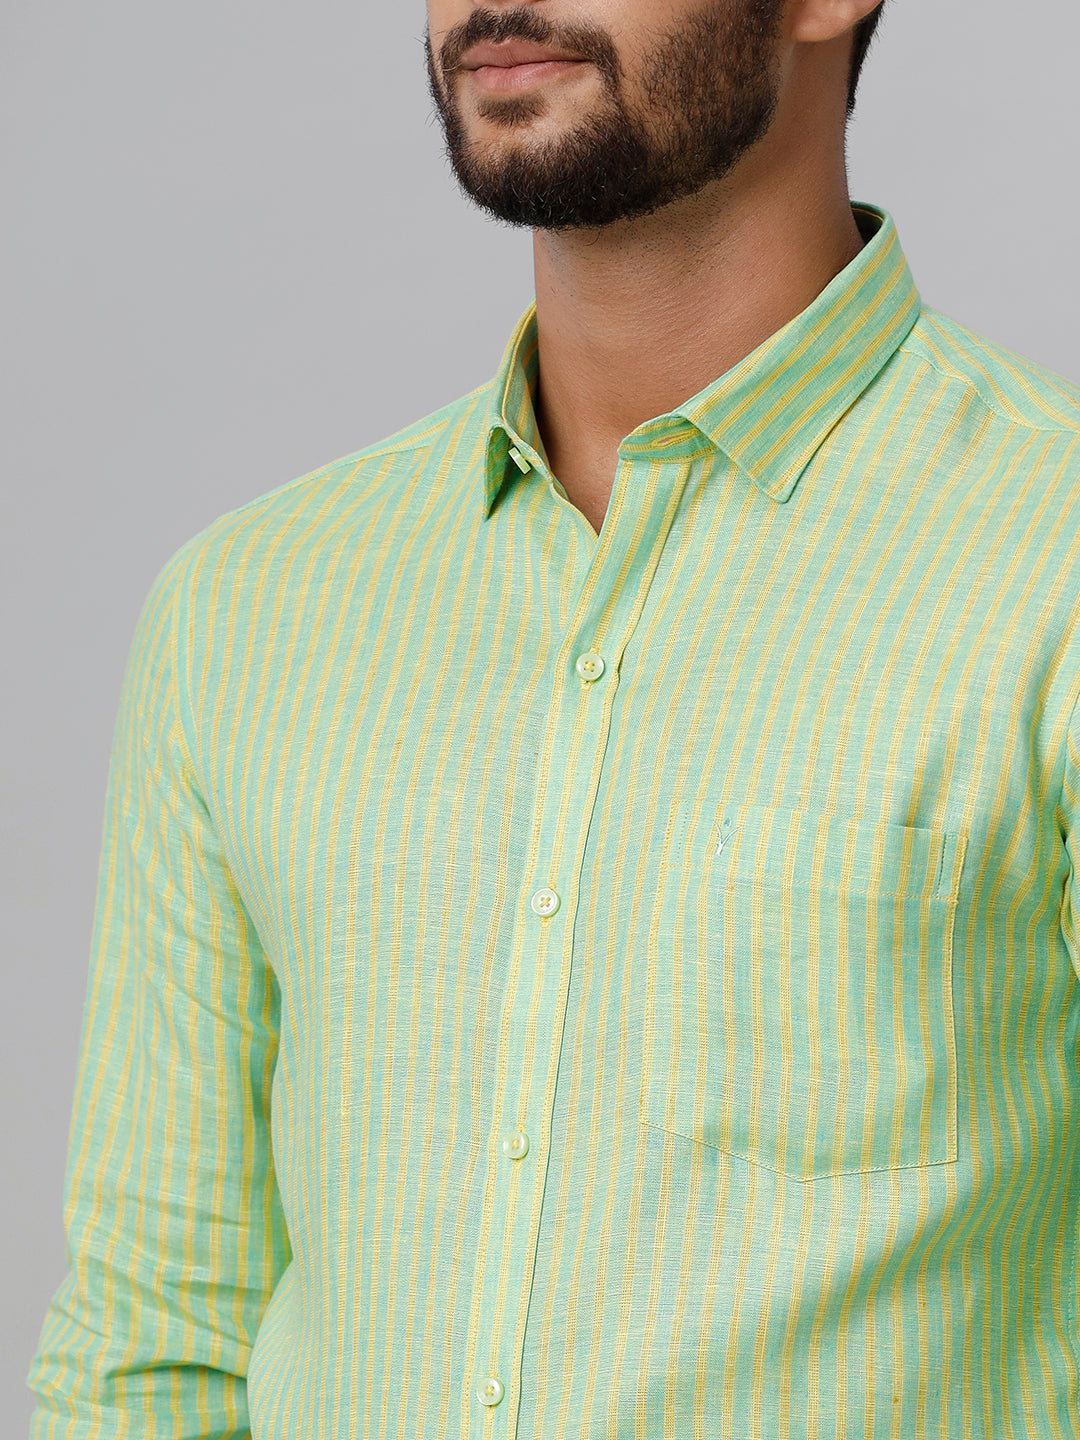 Mens Pure Linen Striped Full Sleeves Green & Yellow Shirt LS6-Zoom view